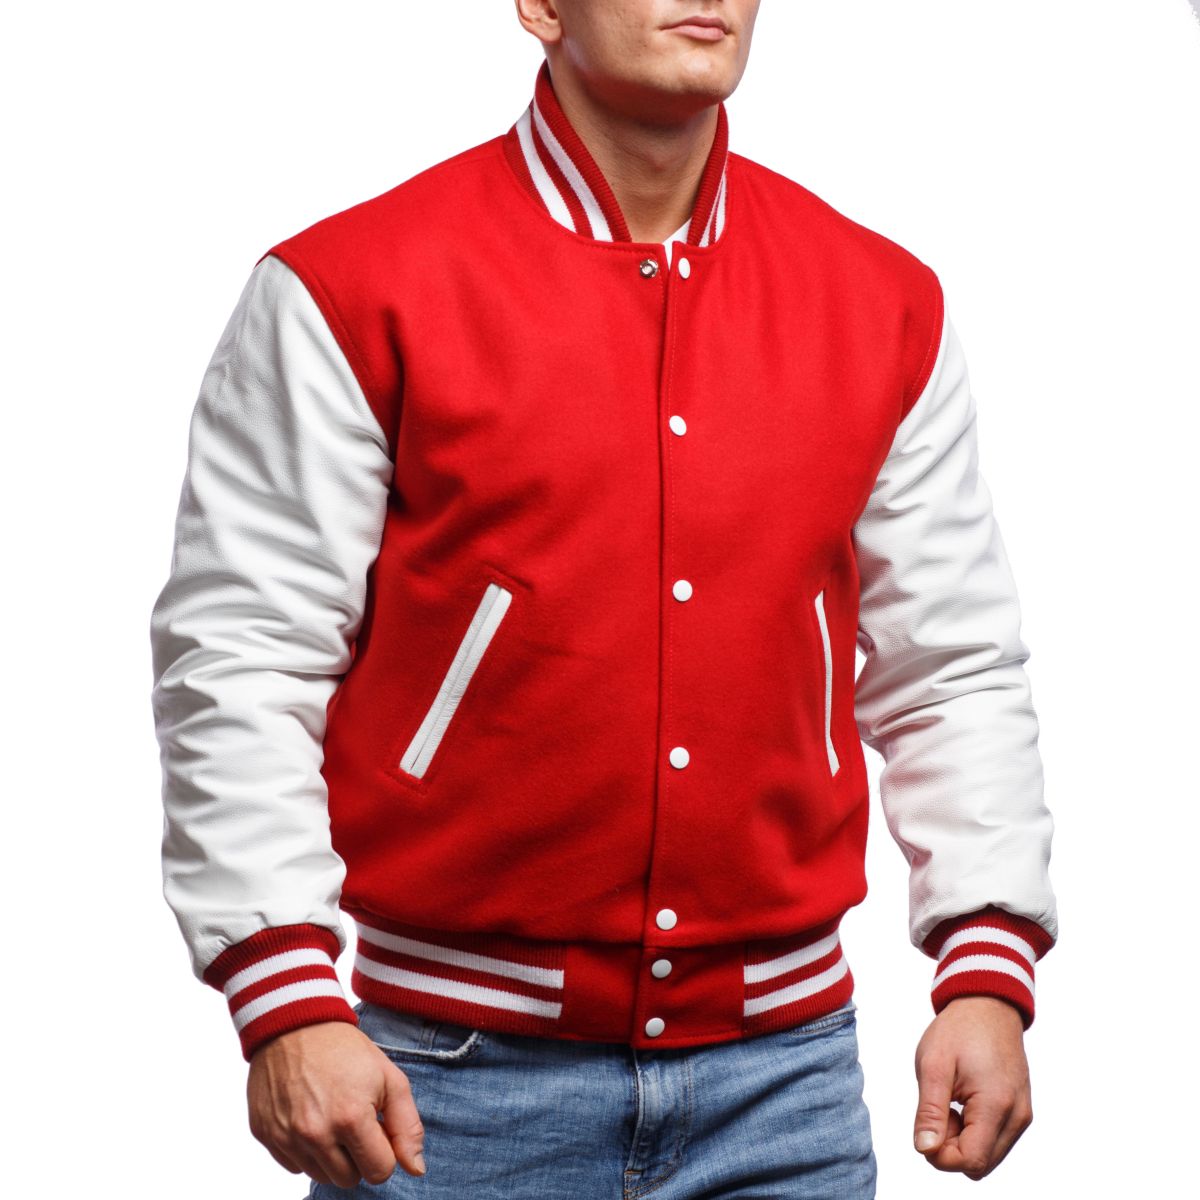 Men's Varsity Jackets Genuine Leather Sleeve And Wool Body Red